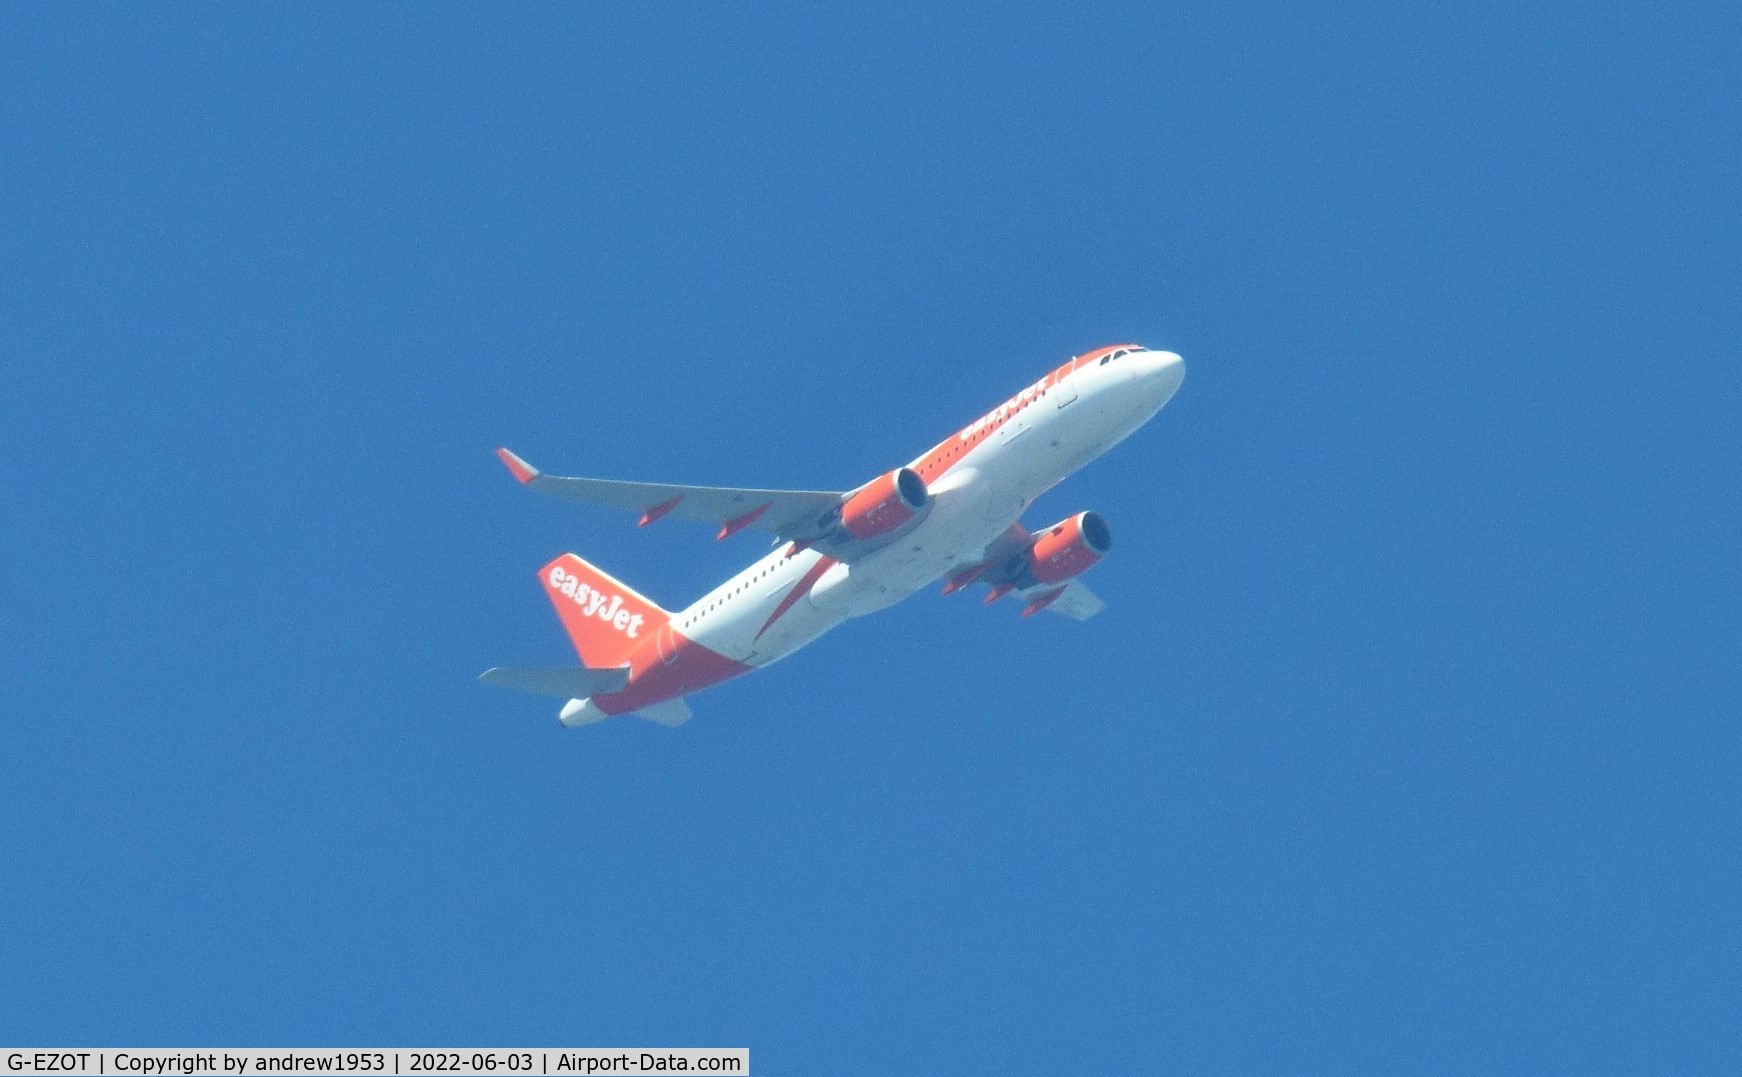 G-EZOT, 2015 Airbus A320-214 C/N 6680, G-EZOT over the Bristol Channel.